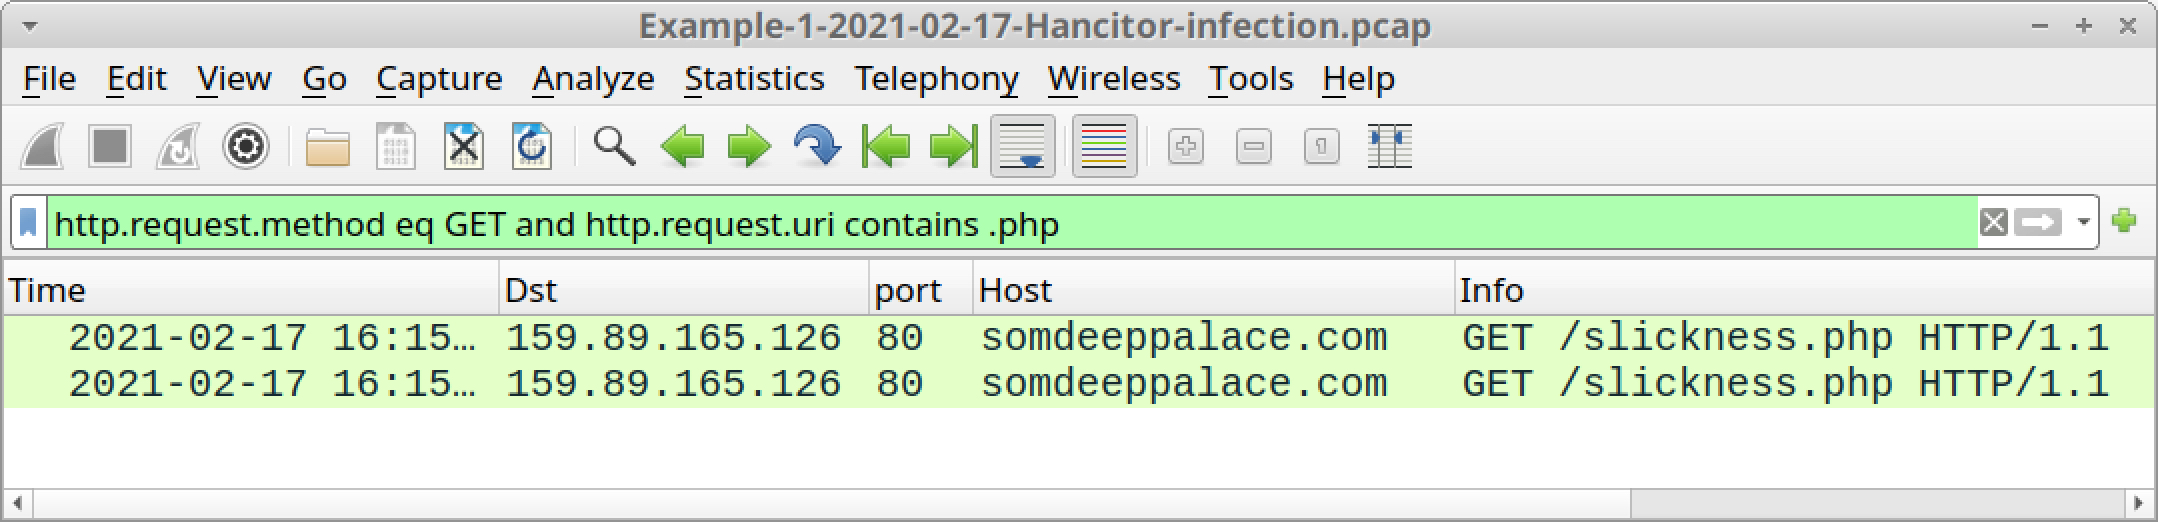 The image shows the results of identifying the malicious URLs by using a Wireshark filter. 